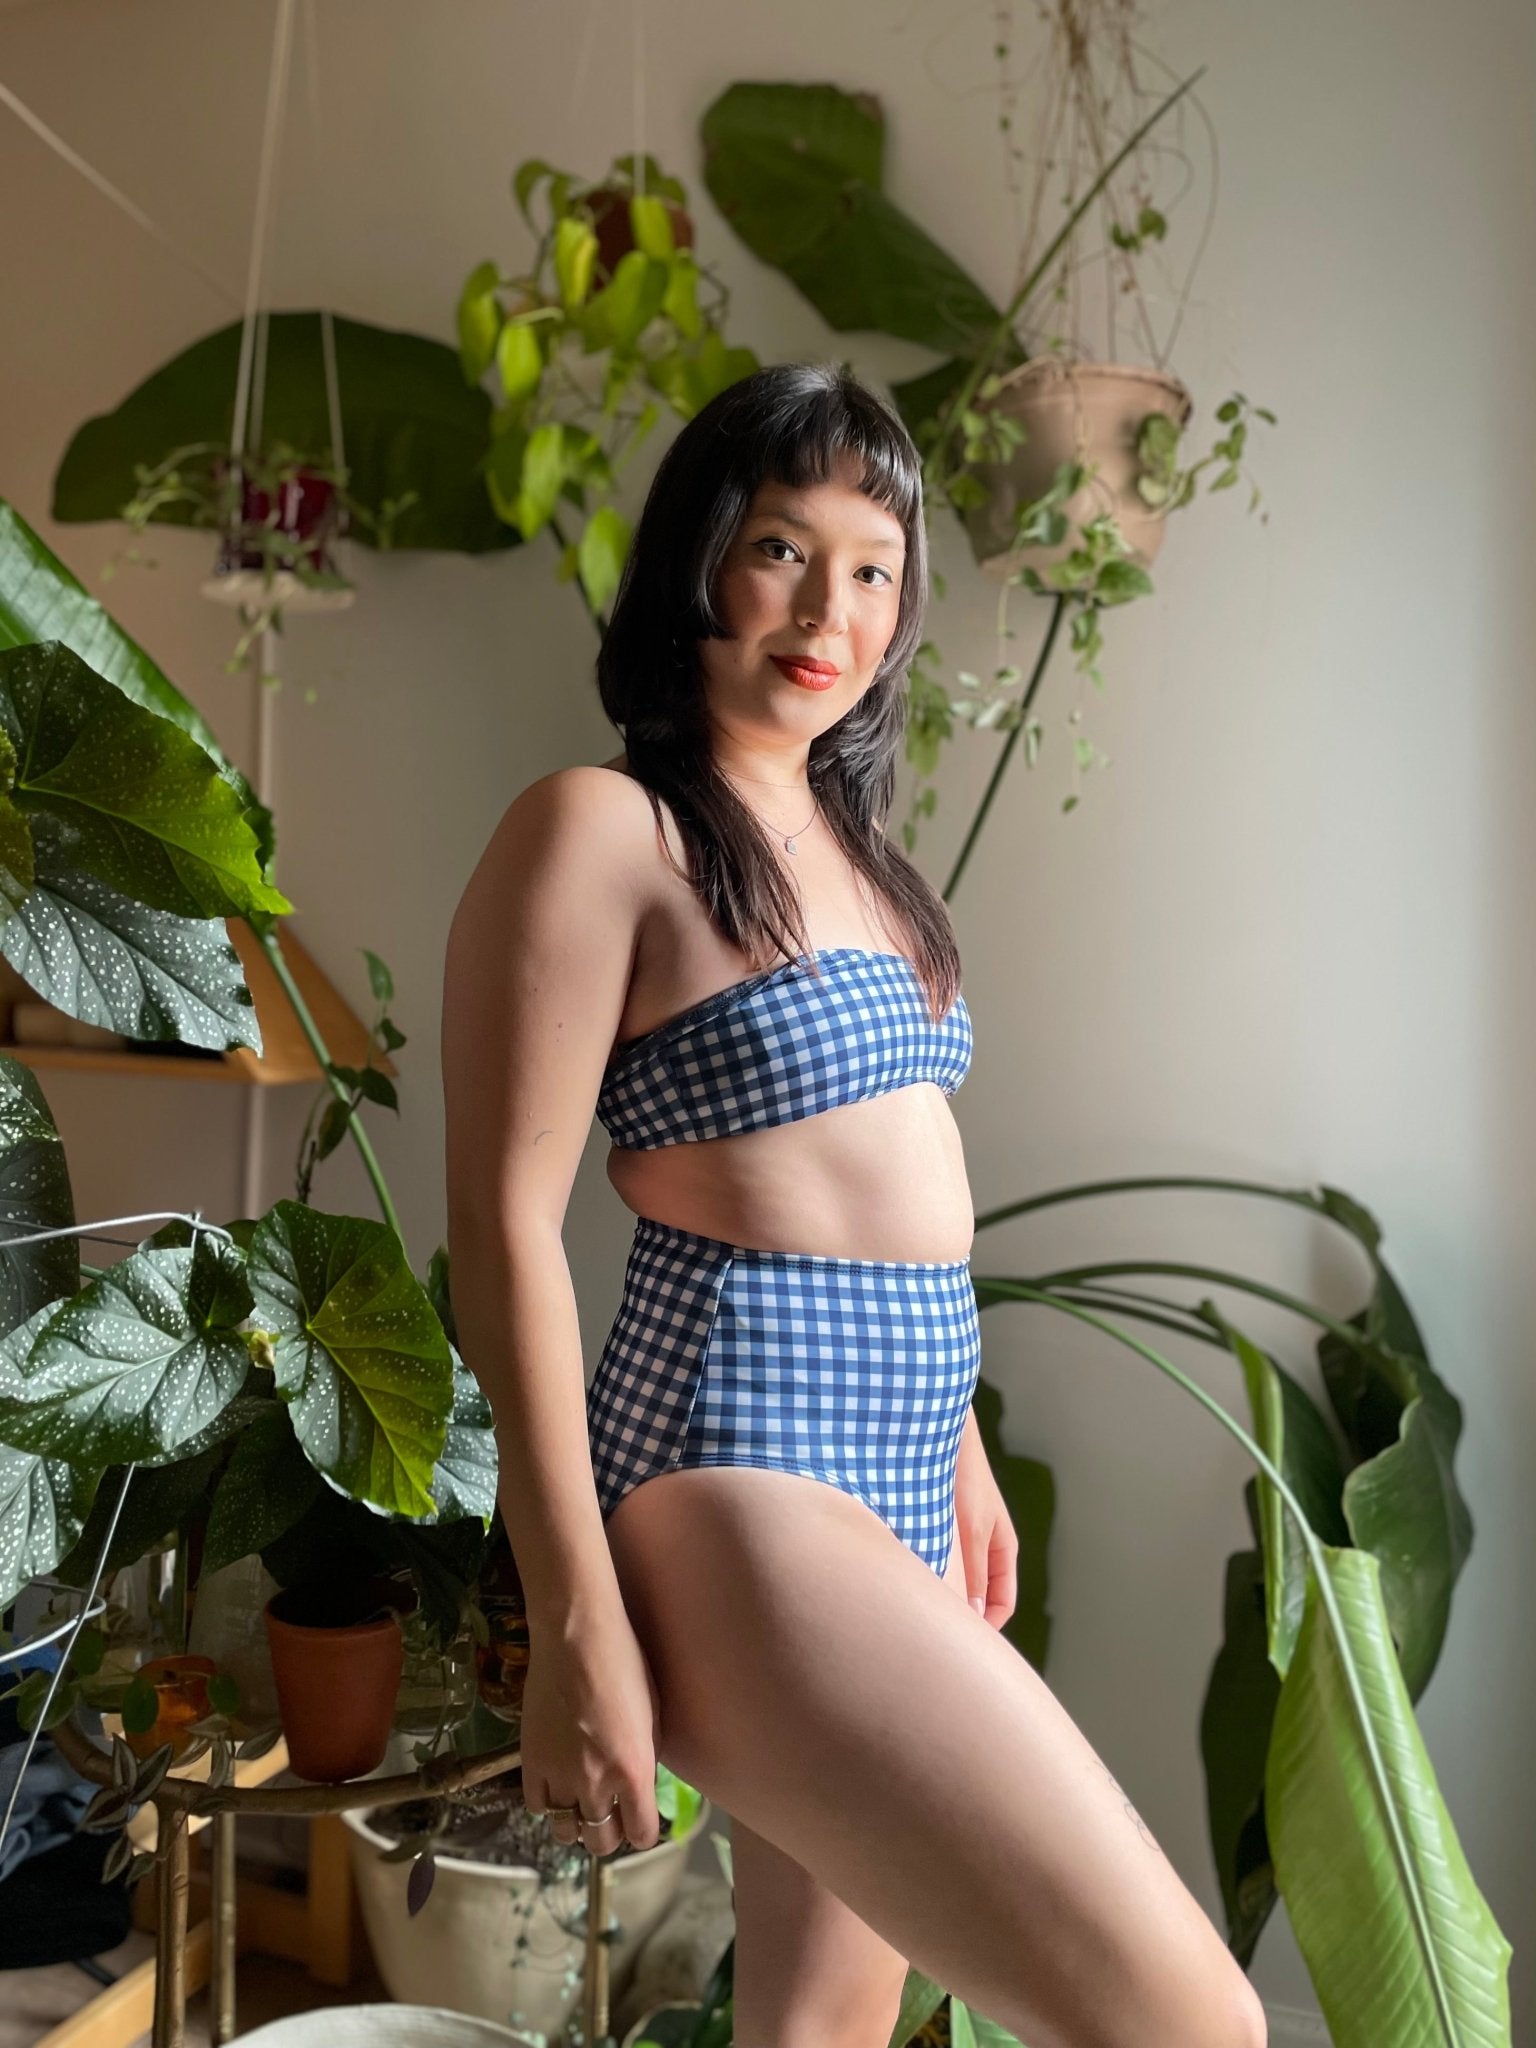 Minnow Bathers Soleil Top (Gingham) - Victoire Boutique - Bathing Suit -  Minnow Bathers - Victoire Boutique - ethical sustainable boutique shopping  Ottawa made in Canada